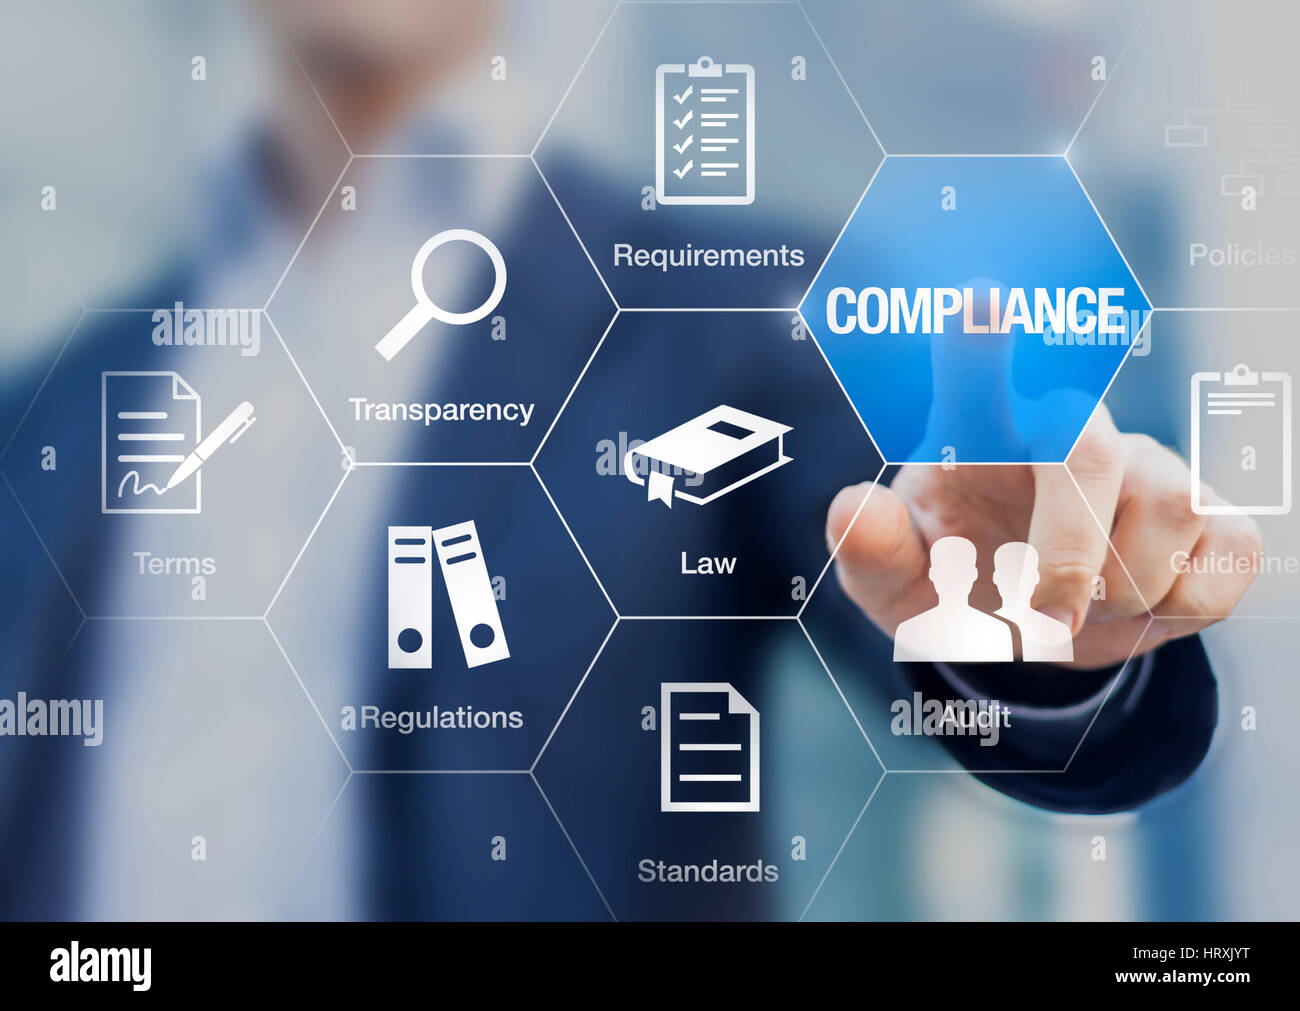 Compliance concept with icons for regulations, law, standards, requirements and audit on a virtual screen with a business person touching a button Stock Photo